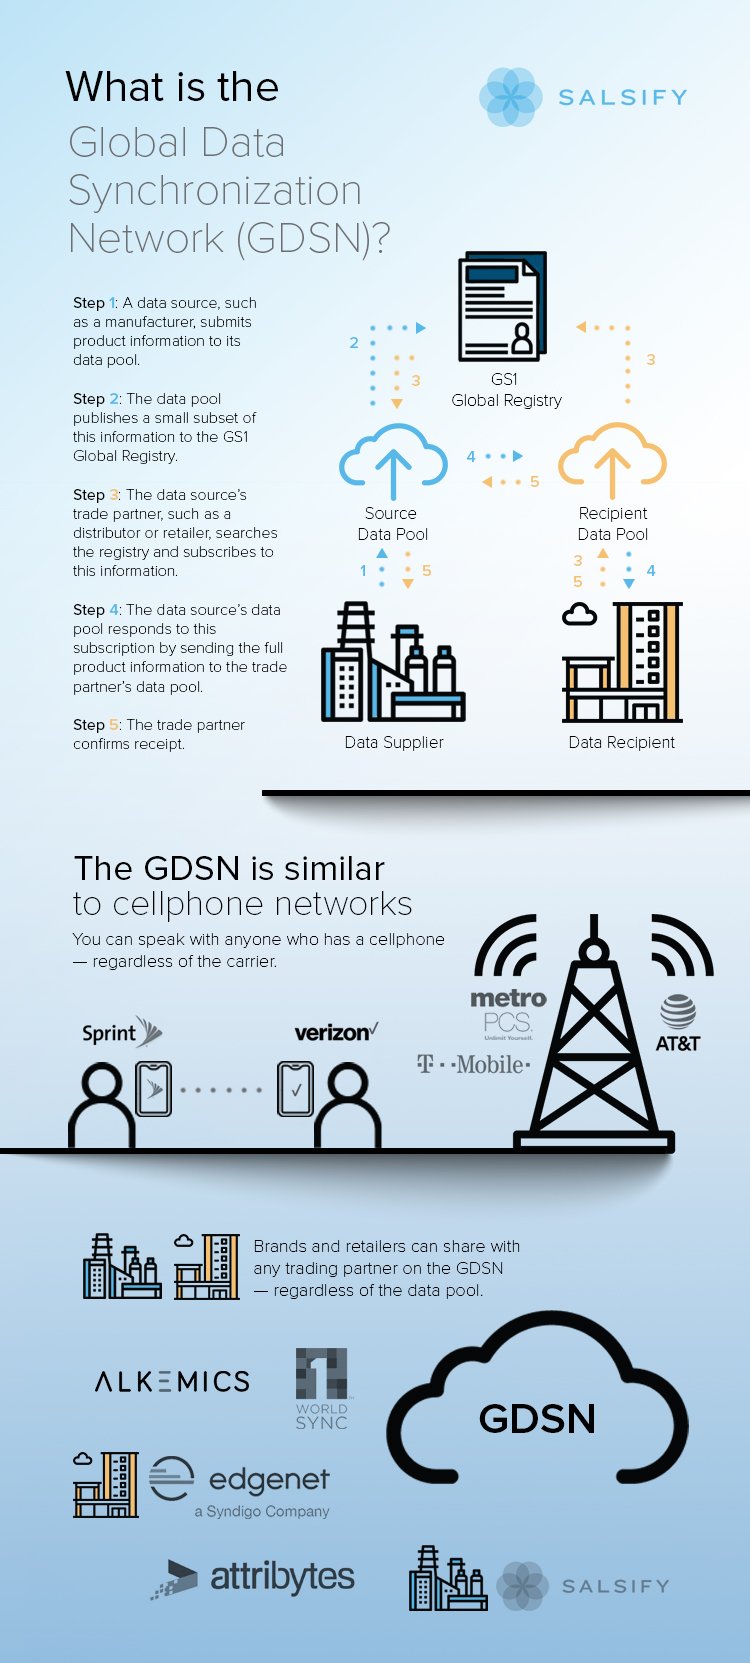 What Is the GDSN and What Are the Most Common Misconceptions Infographic Salsify